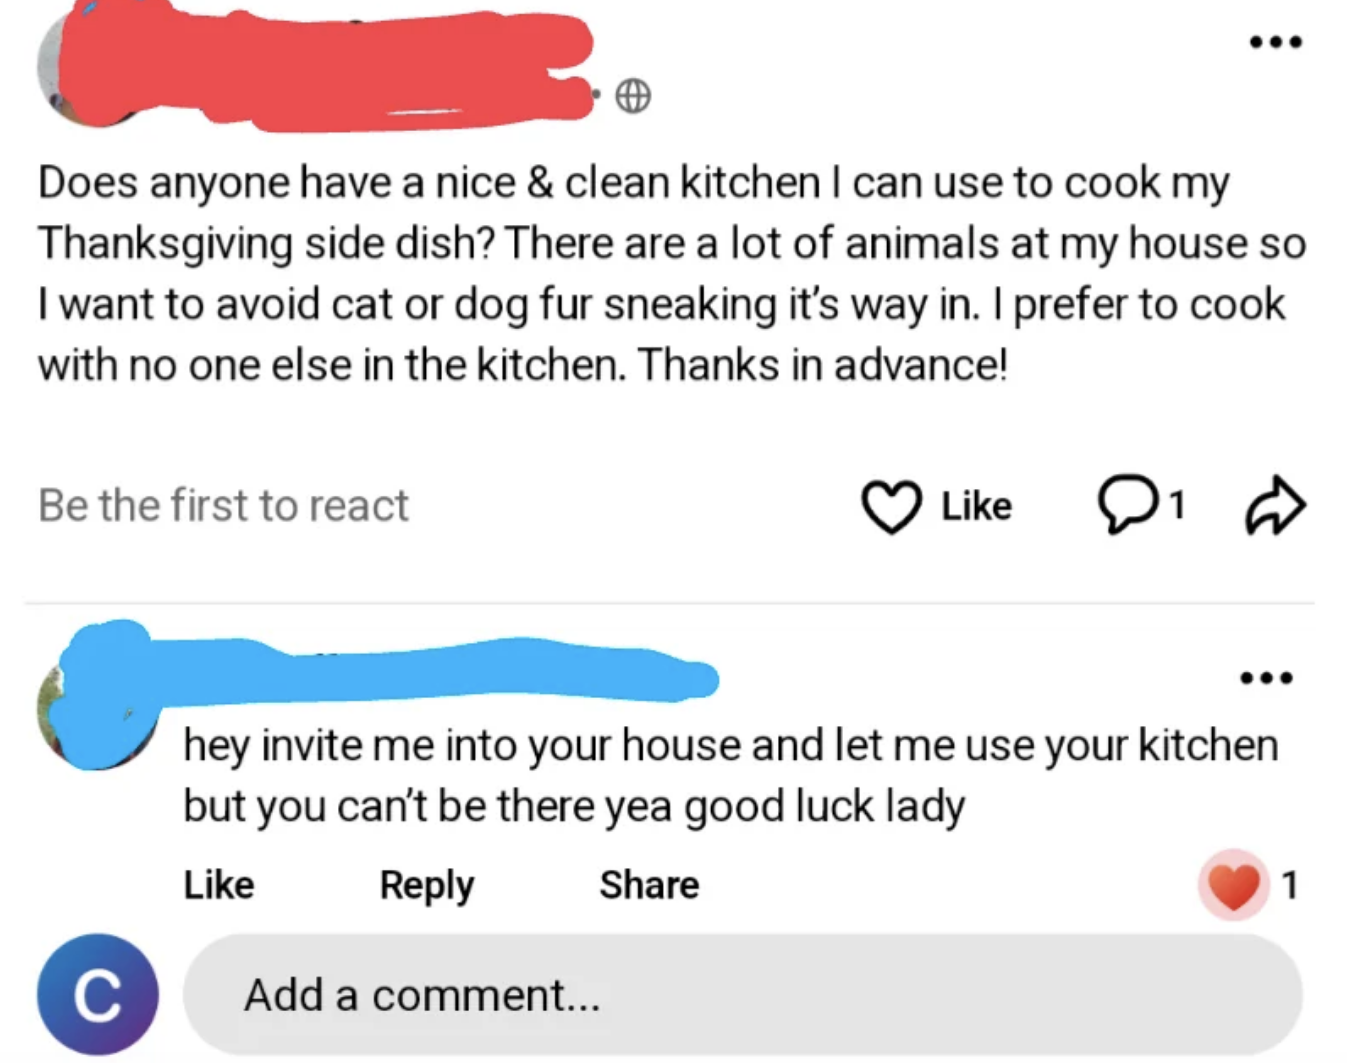 &quot;Hey invite me into your house and let me use your kitchen&quot;